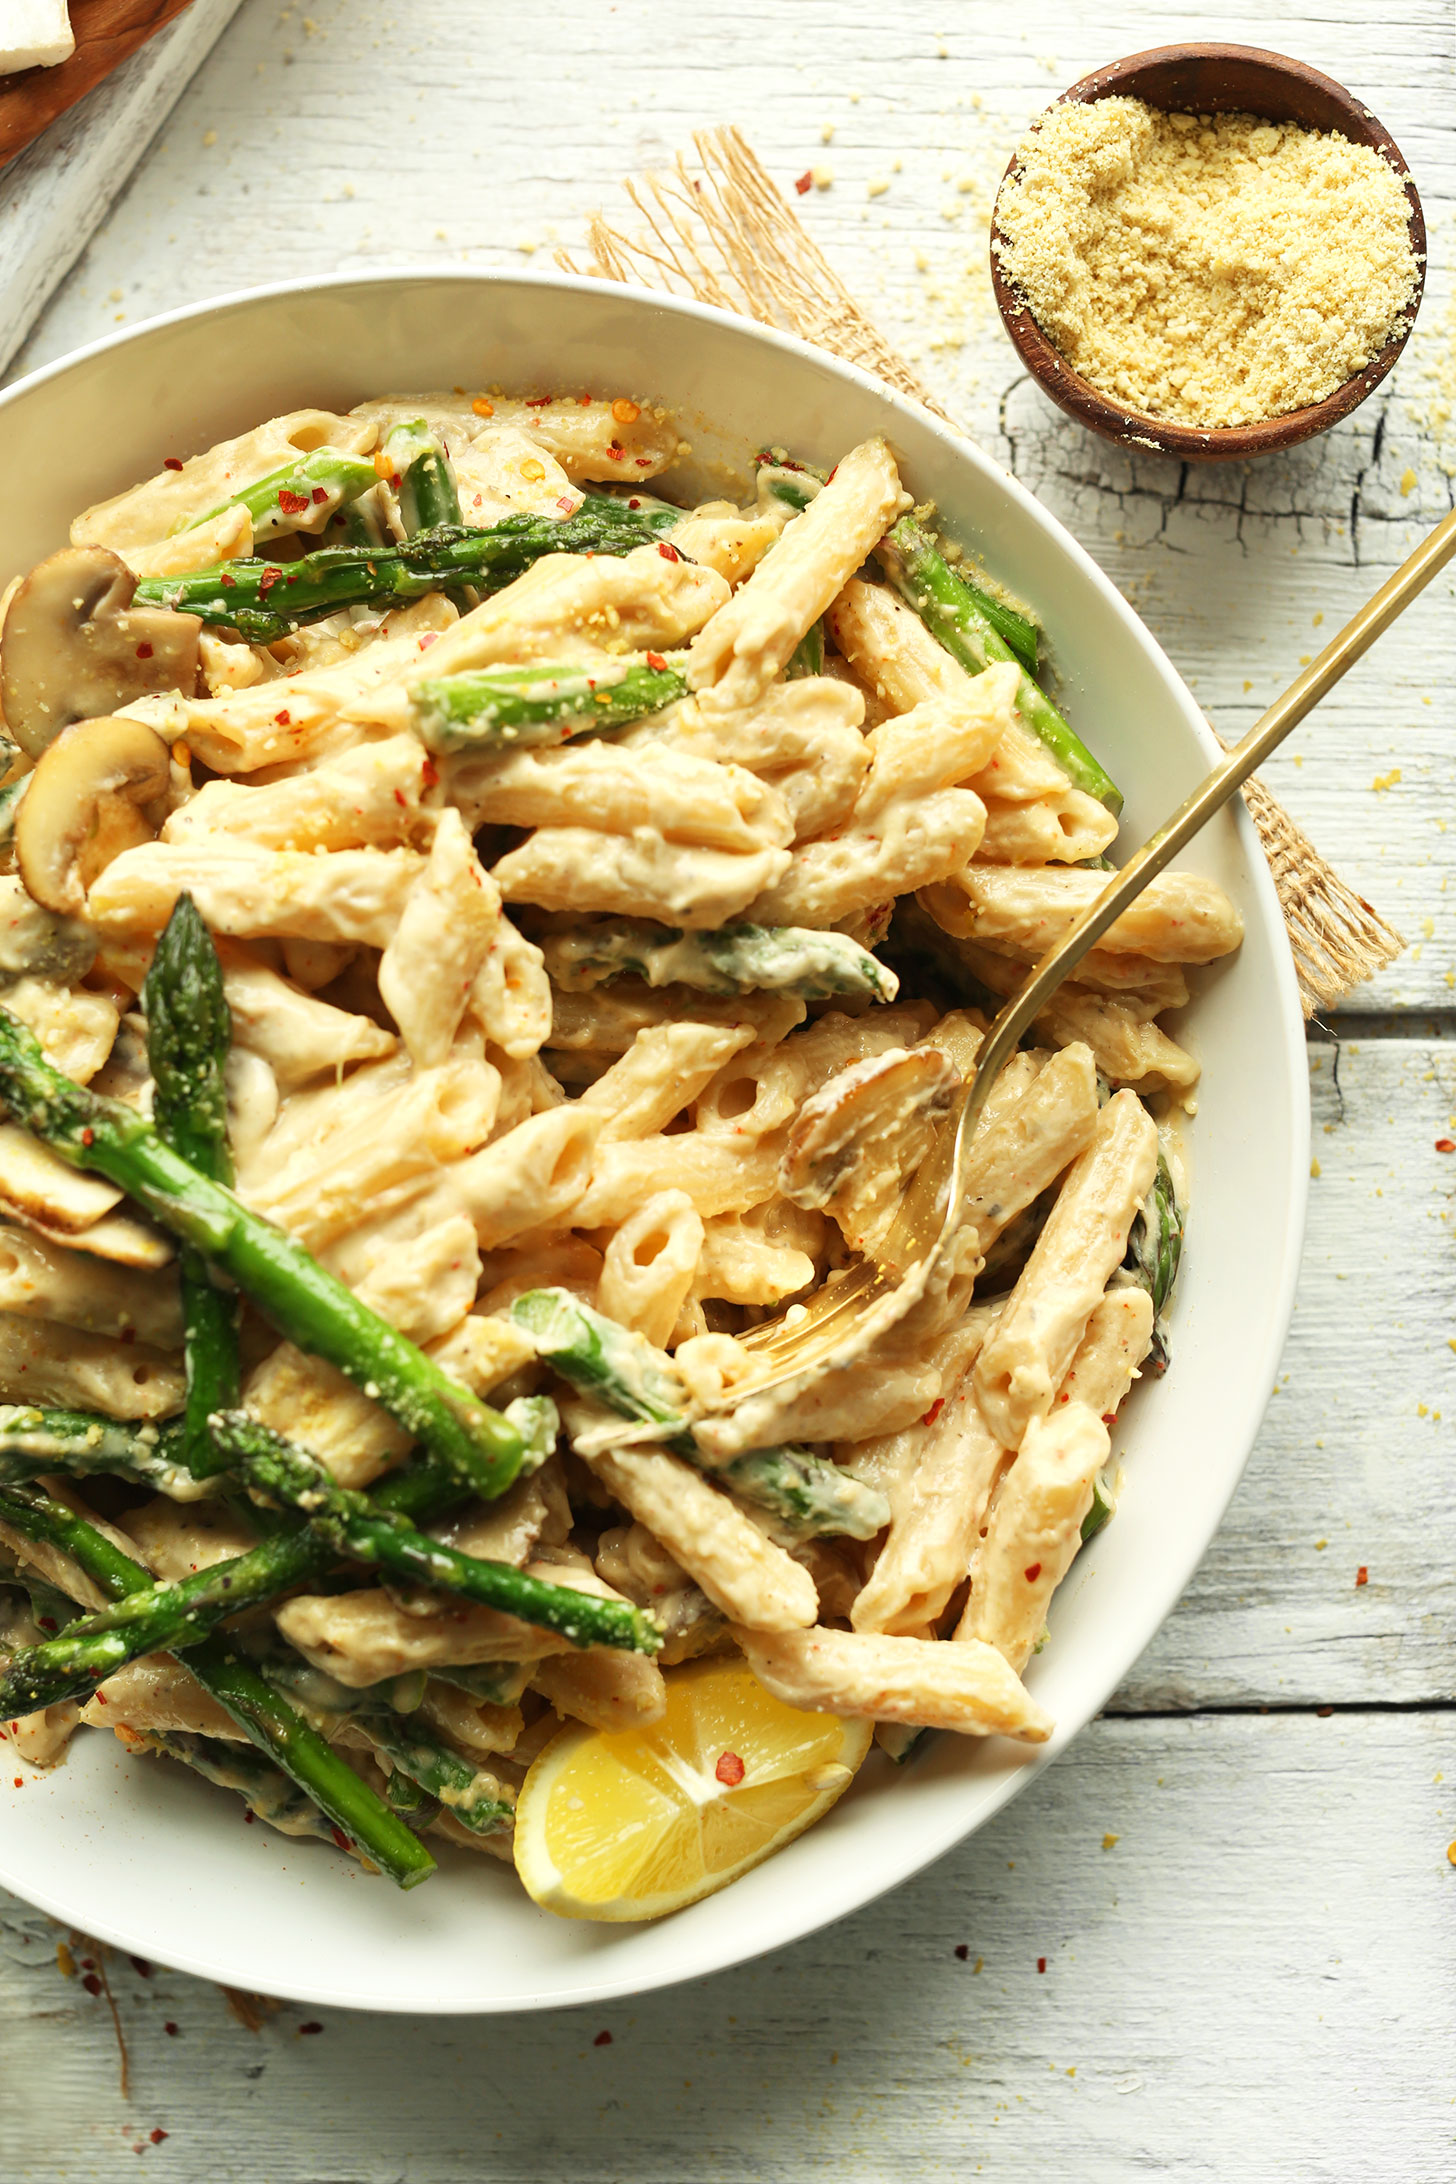 Amazing-30-minute-creamy-asparagus-mushroom-pasta-with-a-secret-sauce-ingredient-a-hearty-plant-based-meal-vegan-glutenfree-pasta-recipe-dinner